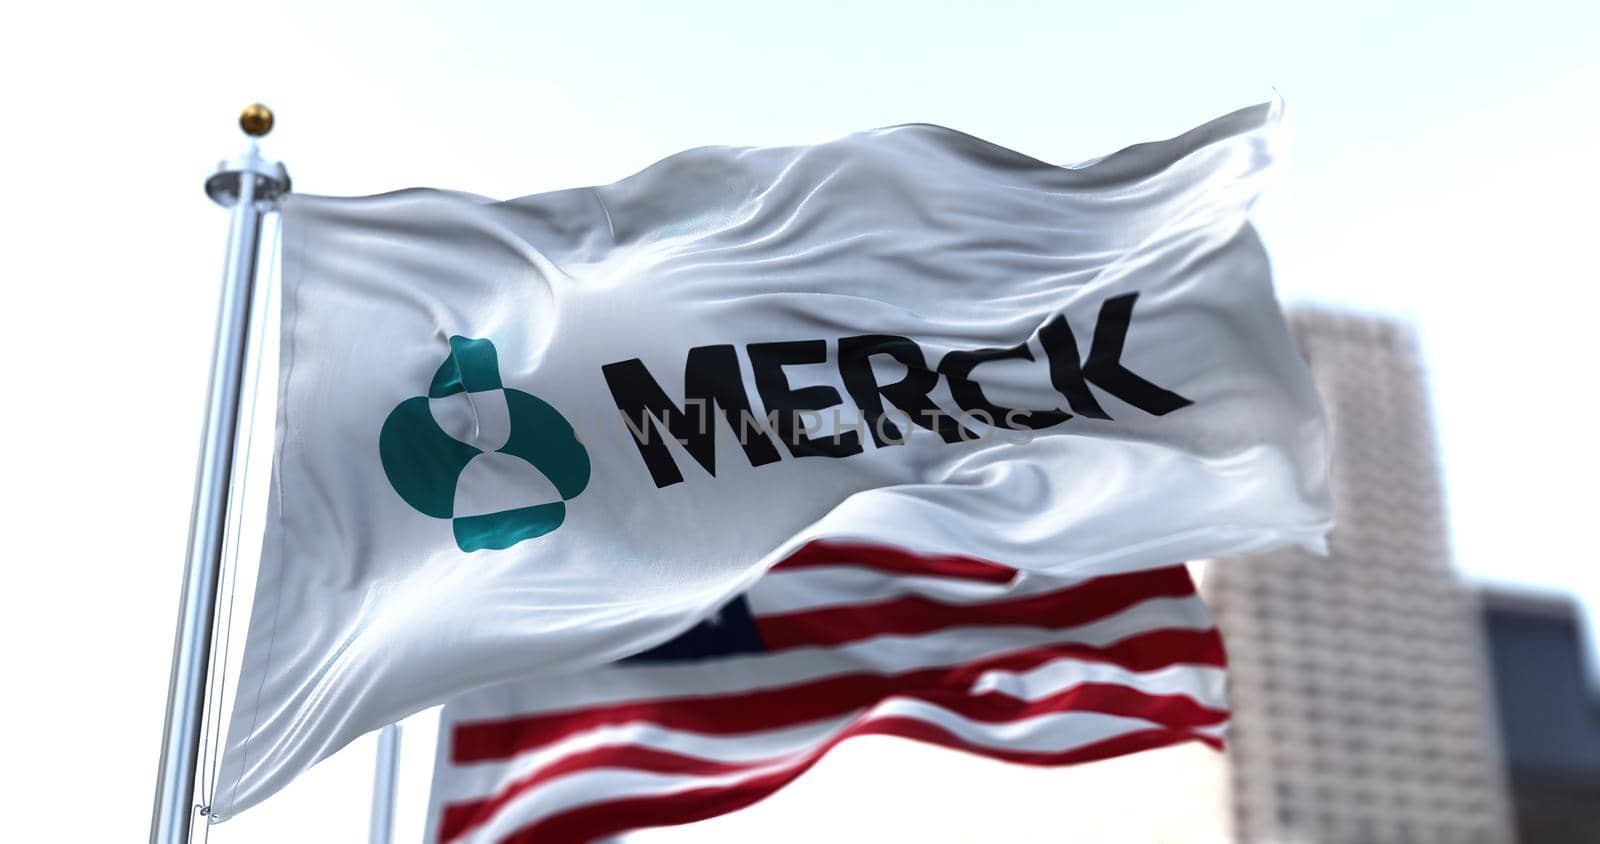 New York ,USA, October 2021: the flag with the logo of Merck waving in the wind with the American flag blurred in the background. Merck is an American multinational pharmaceutical company